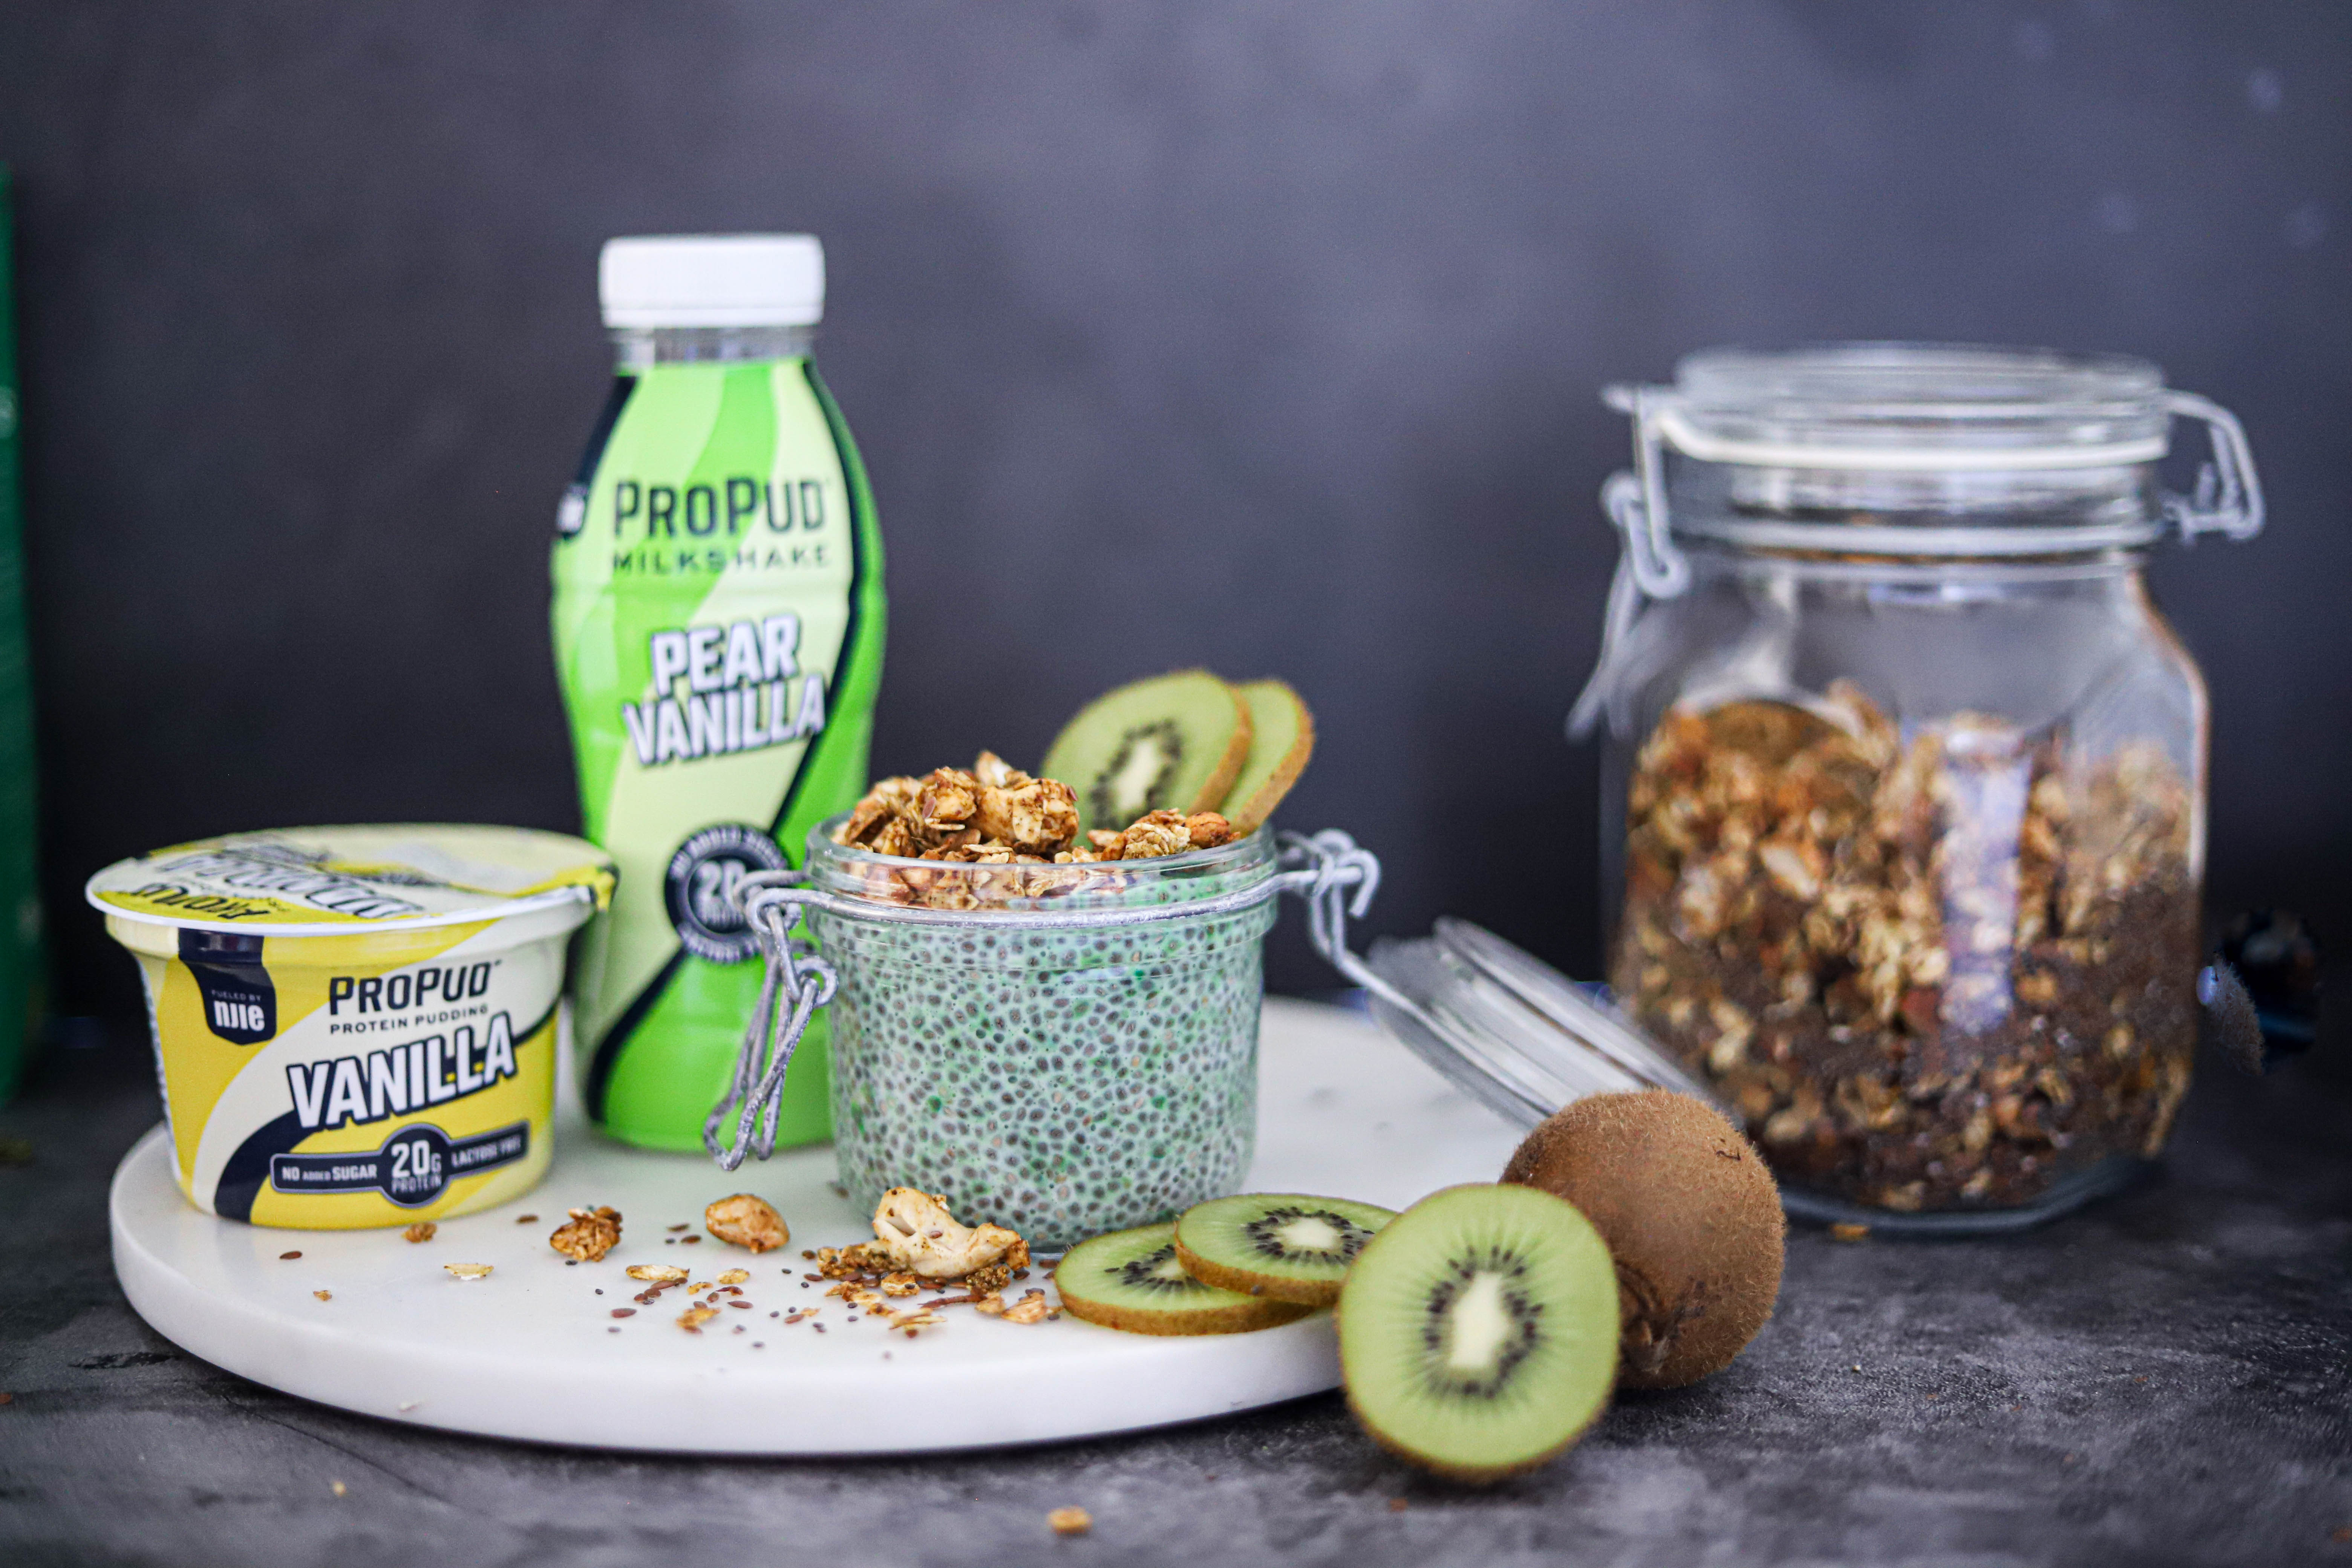 Image for a chia pudding with matcha and kiwi recipe containing products from NJIE's ProPud brand.